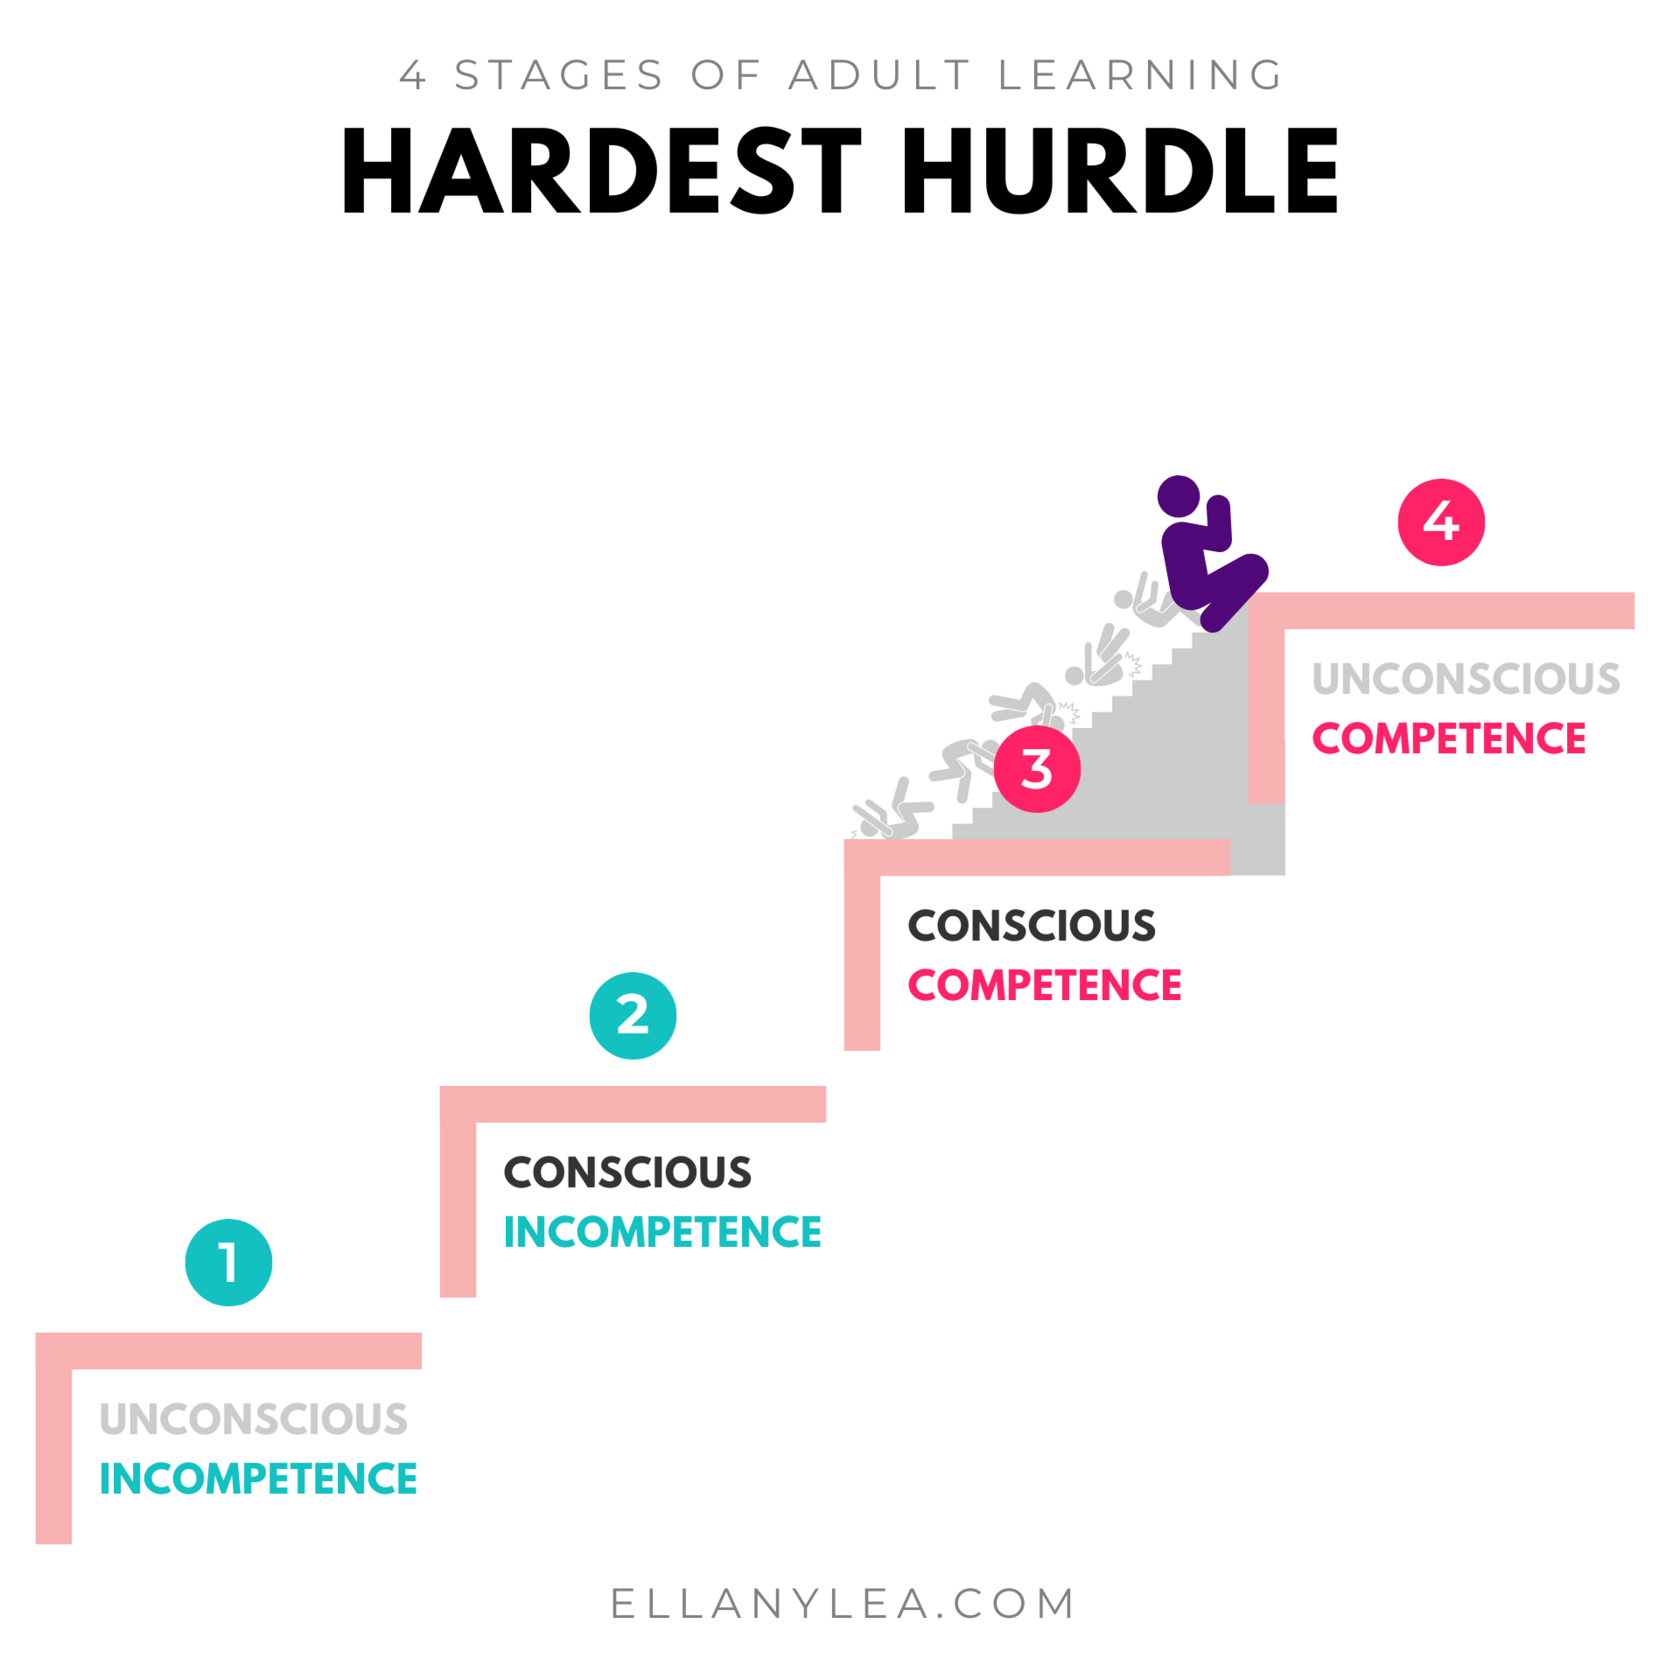 4-Stages-Adult-Learning-Hurdle-Hardest